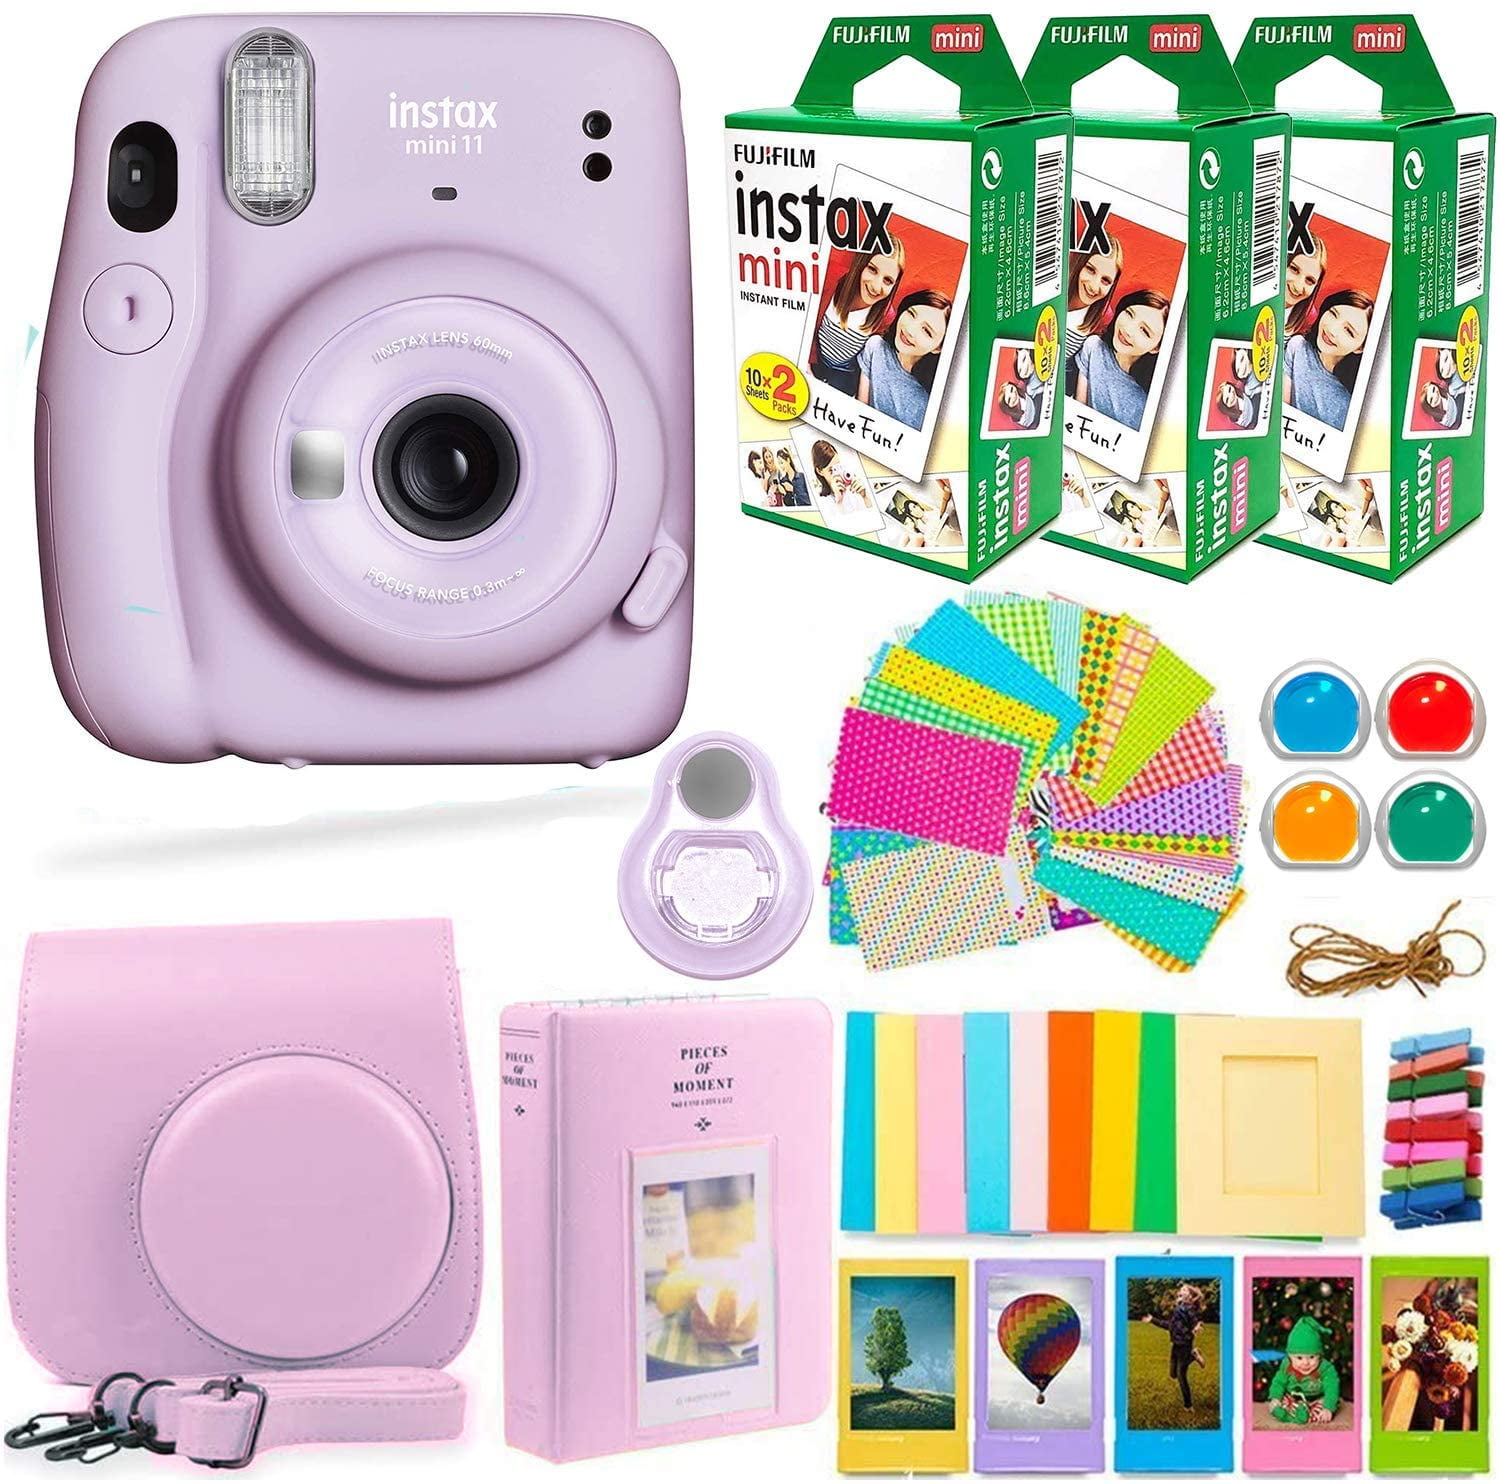 Starry sky Leebotree Instant Camera Accessories Compatible with Instax Mini 11 Instant Film Camera Include Case/Album/Filters/Wall Hang Frames/Film Frames/Border Stickers/Corner Stickers